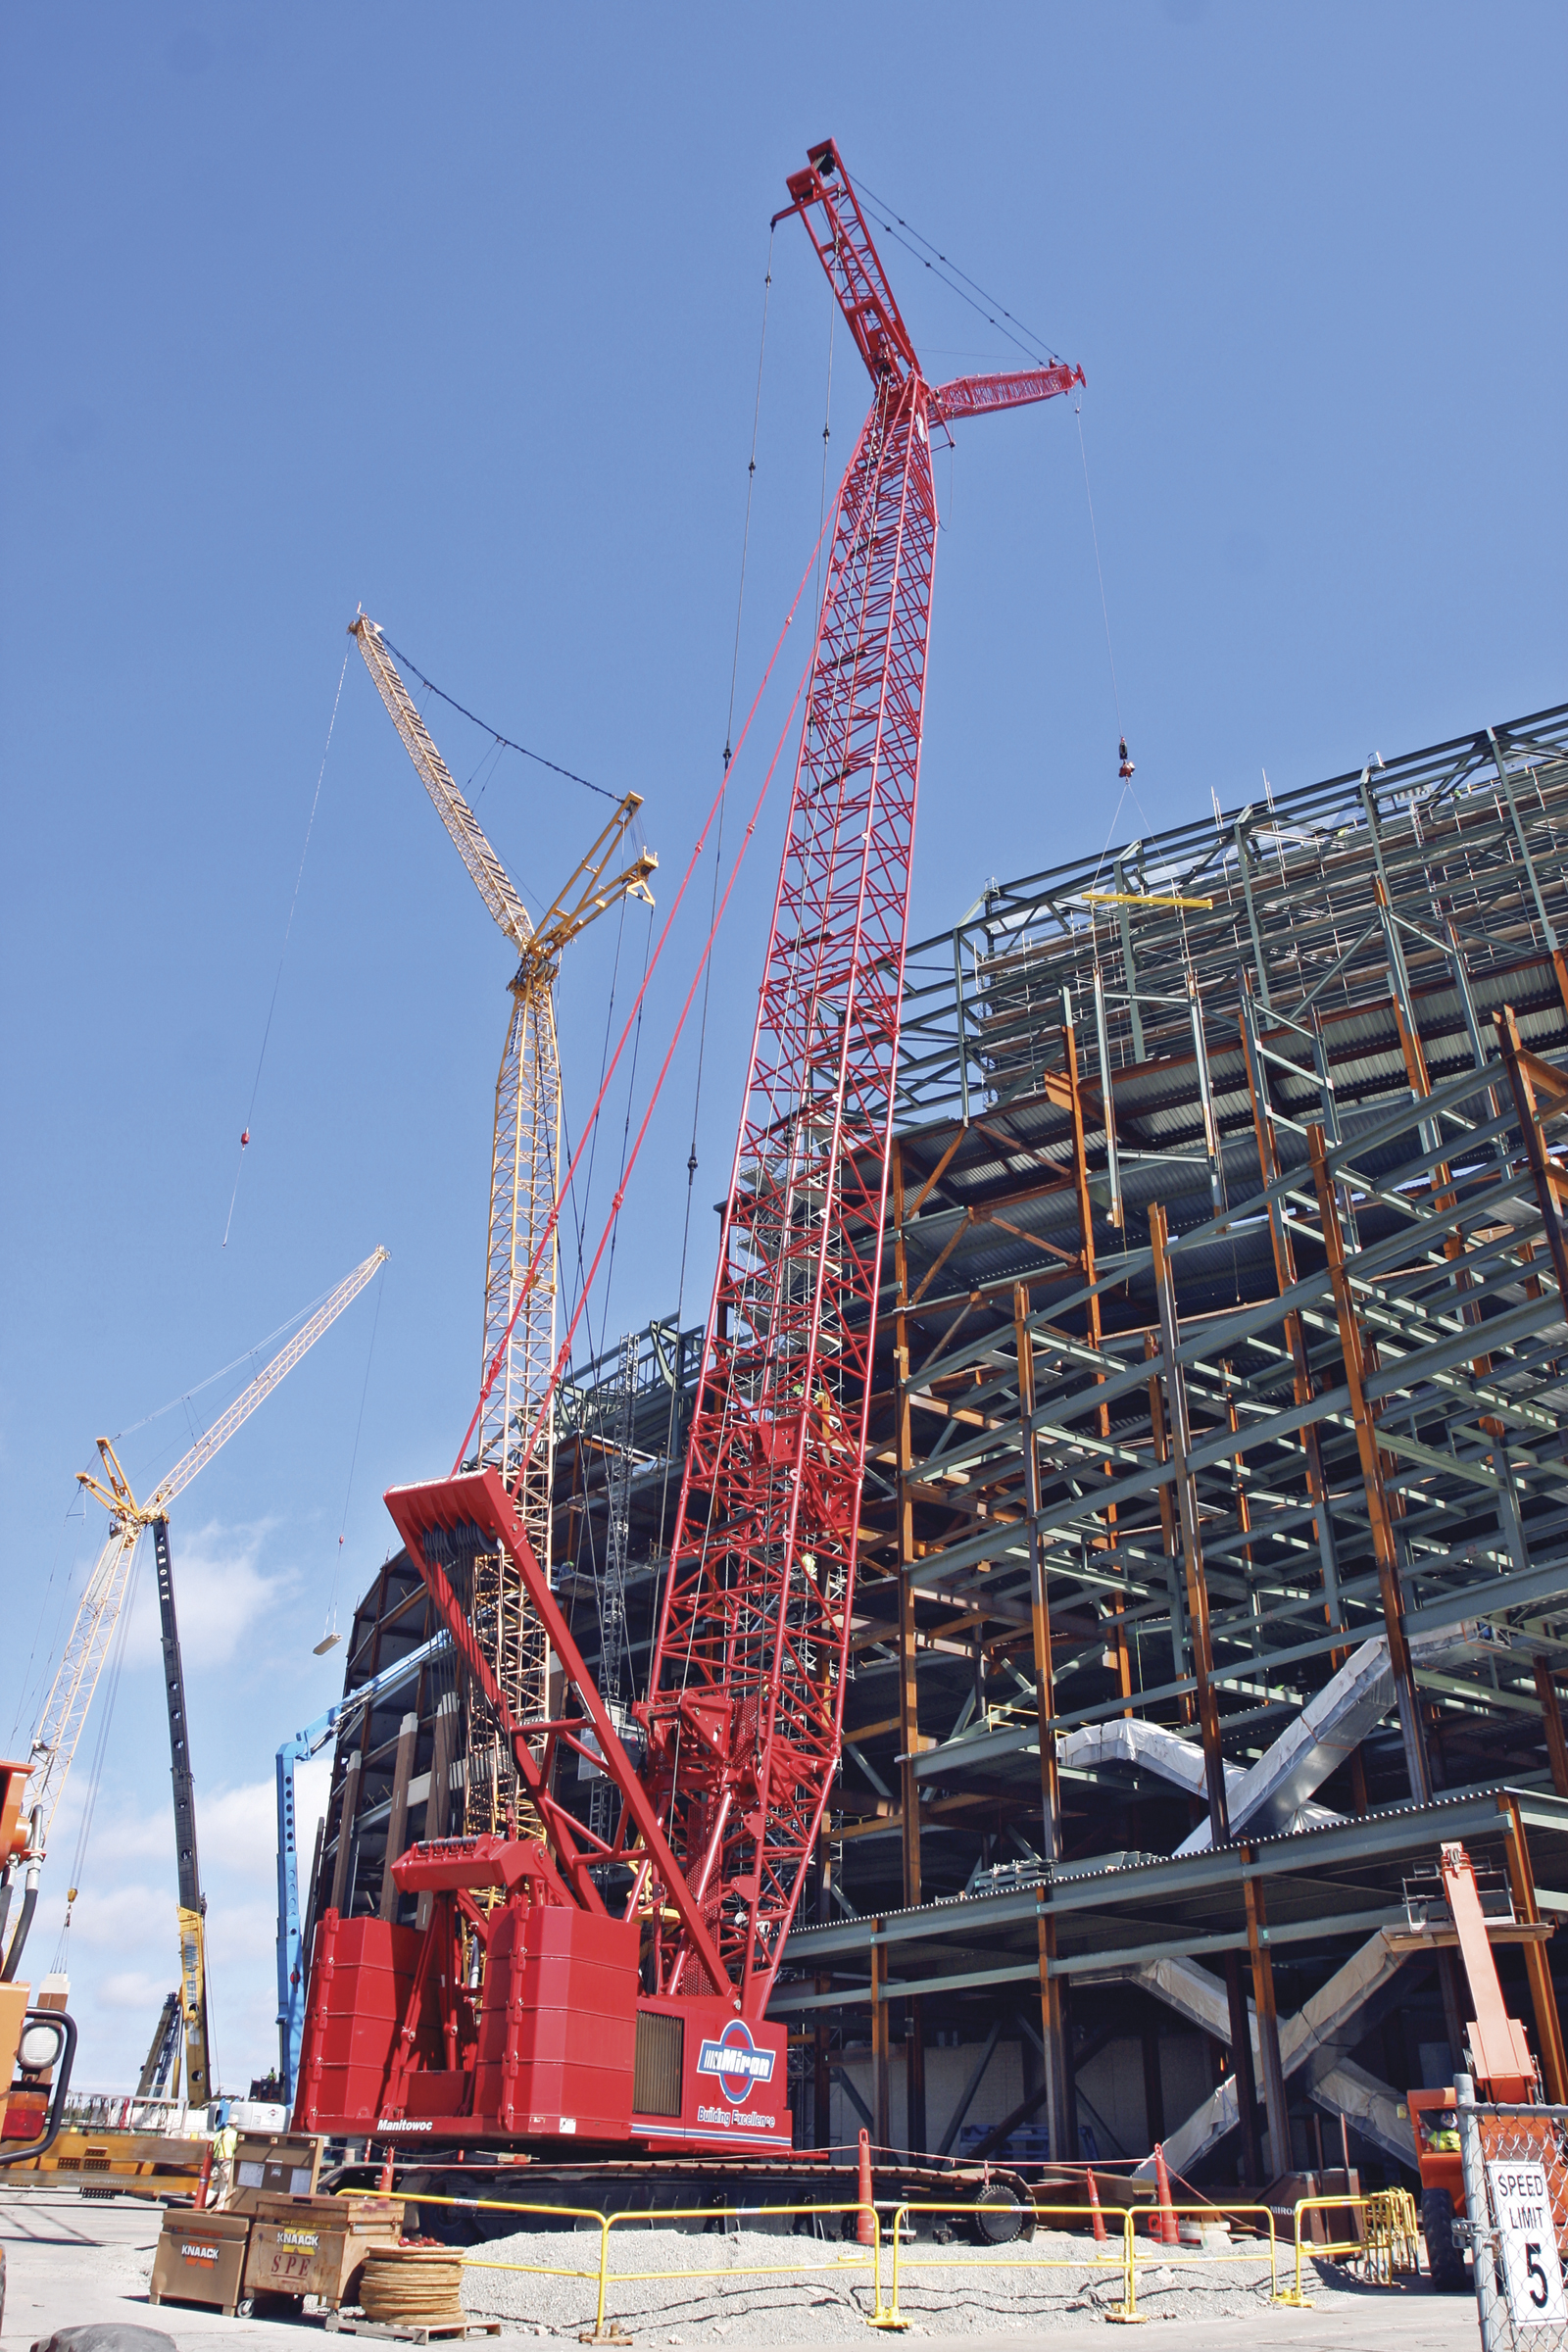 To reach high enough to place the new scoreboards, the company rigged the Manitowoc 14000, a 220USt capacity lattice-boom crawler crane, with a luffing jib.